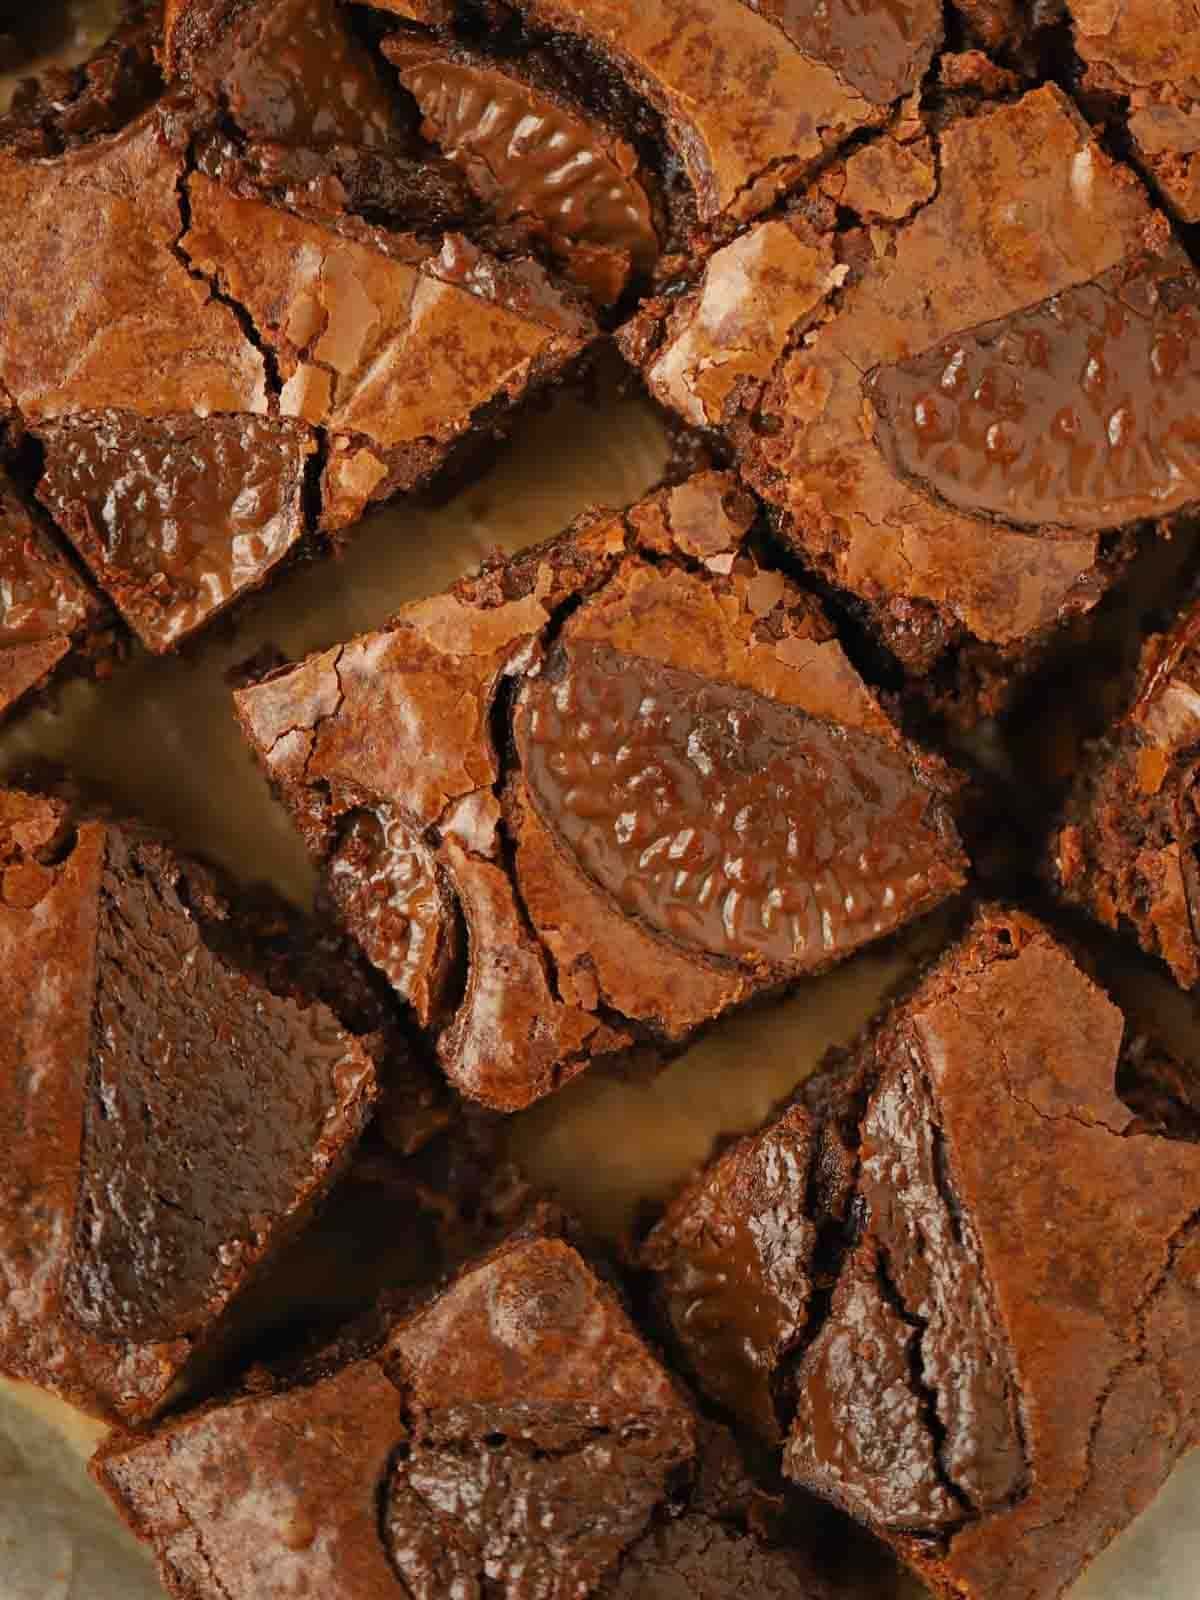 A close up of chocolate orange brownies on a board.